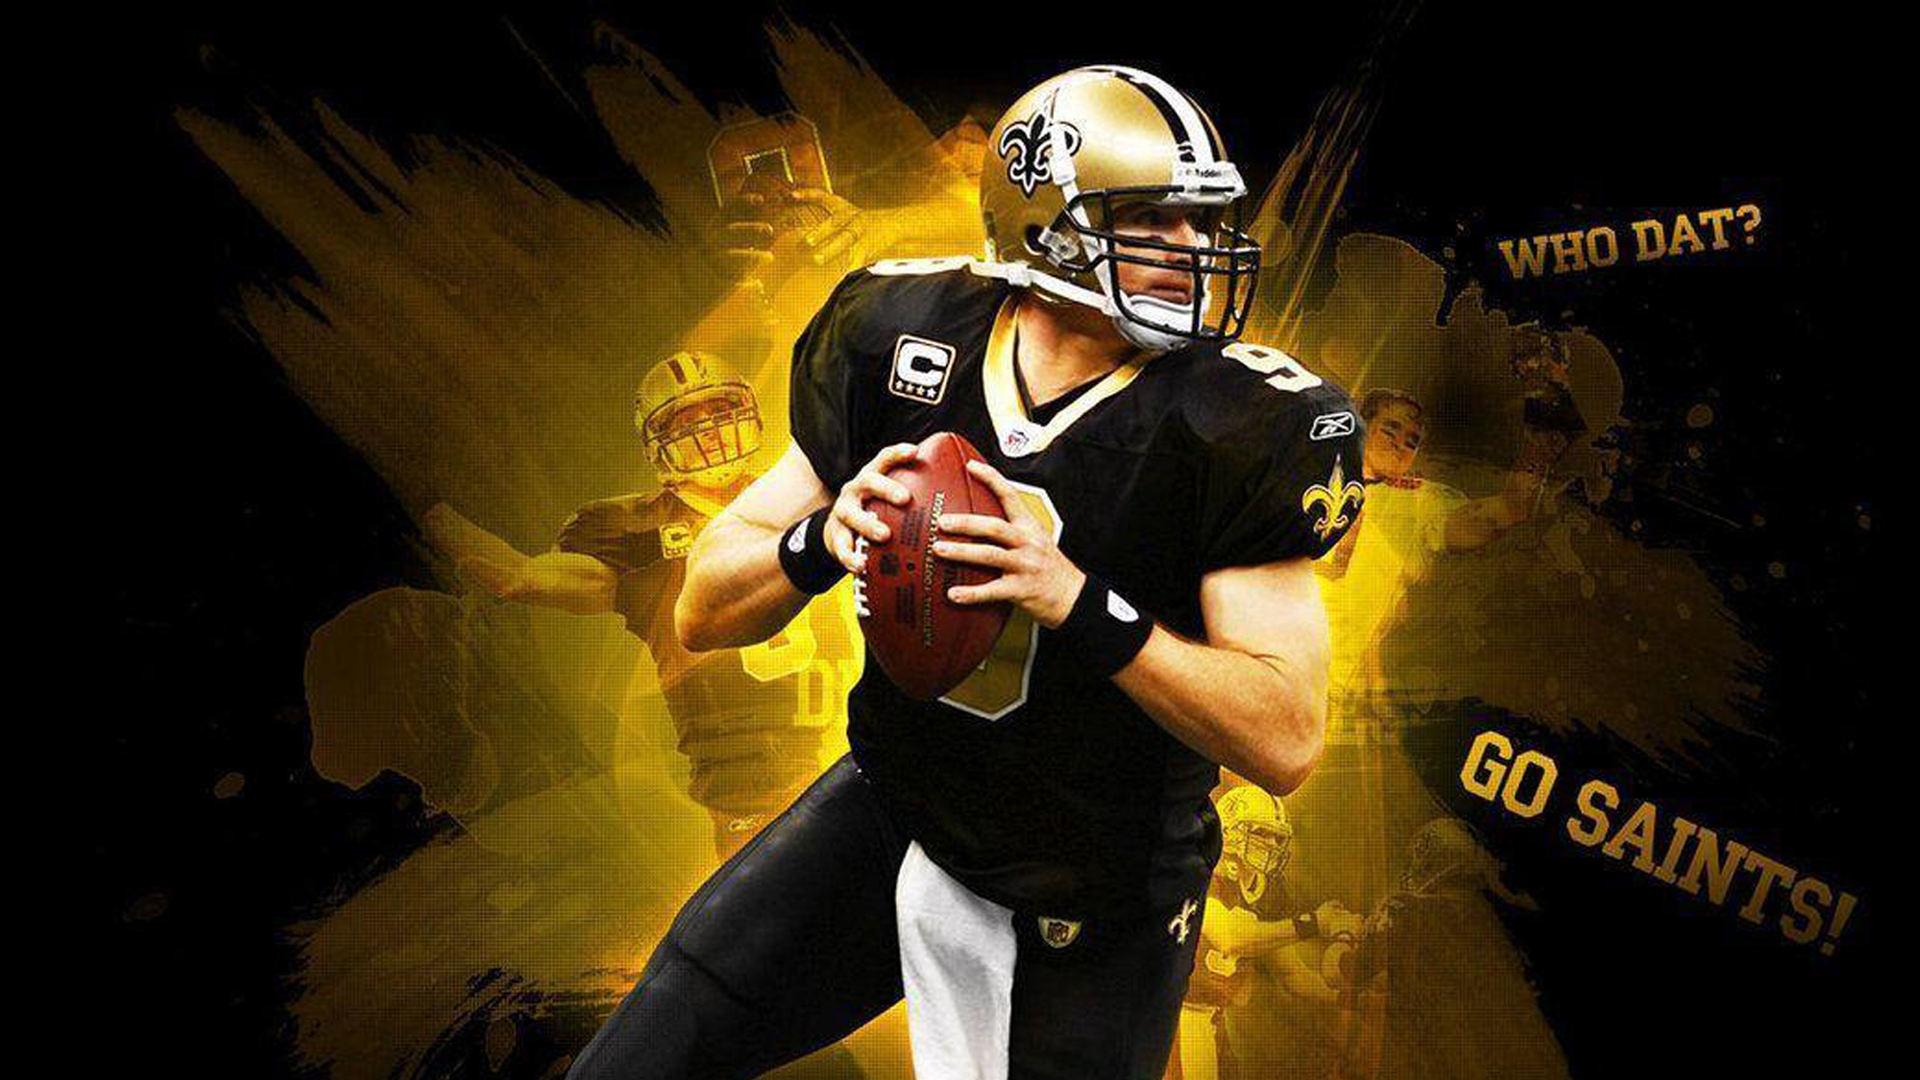 Drew Brees Football Player Wallpaper, HD Sports 4K Wallpapers, Images